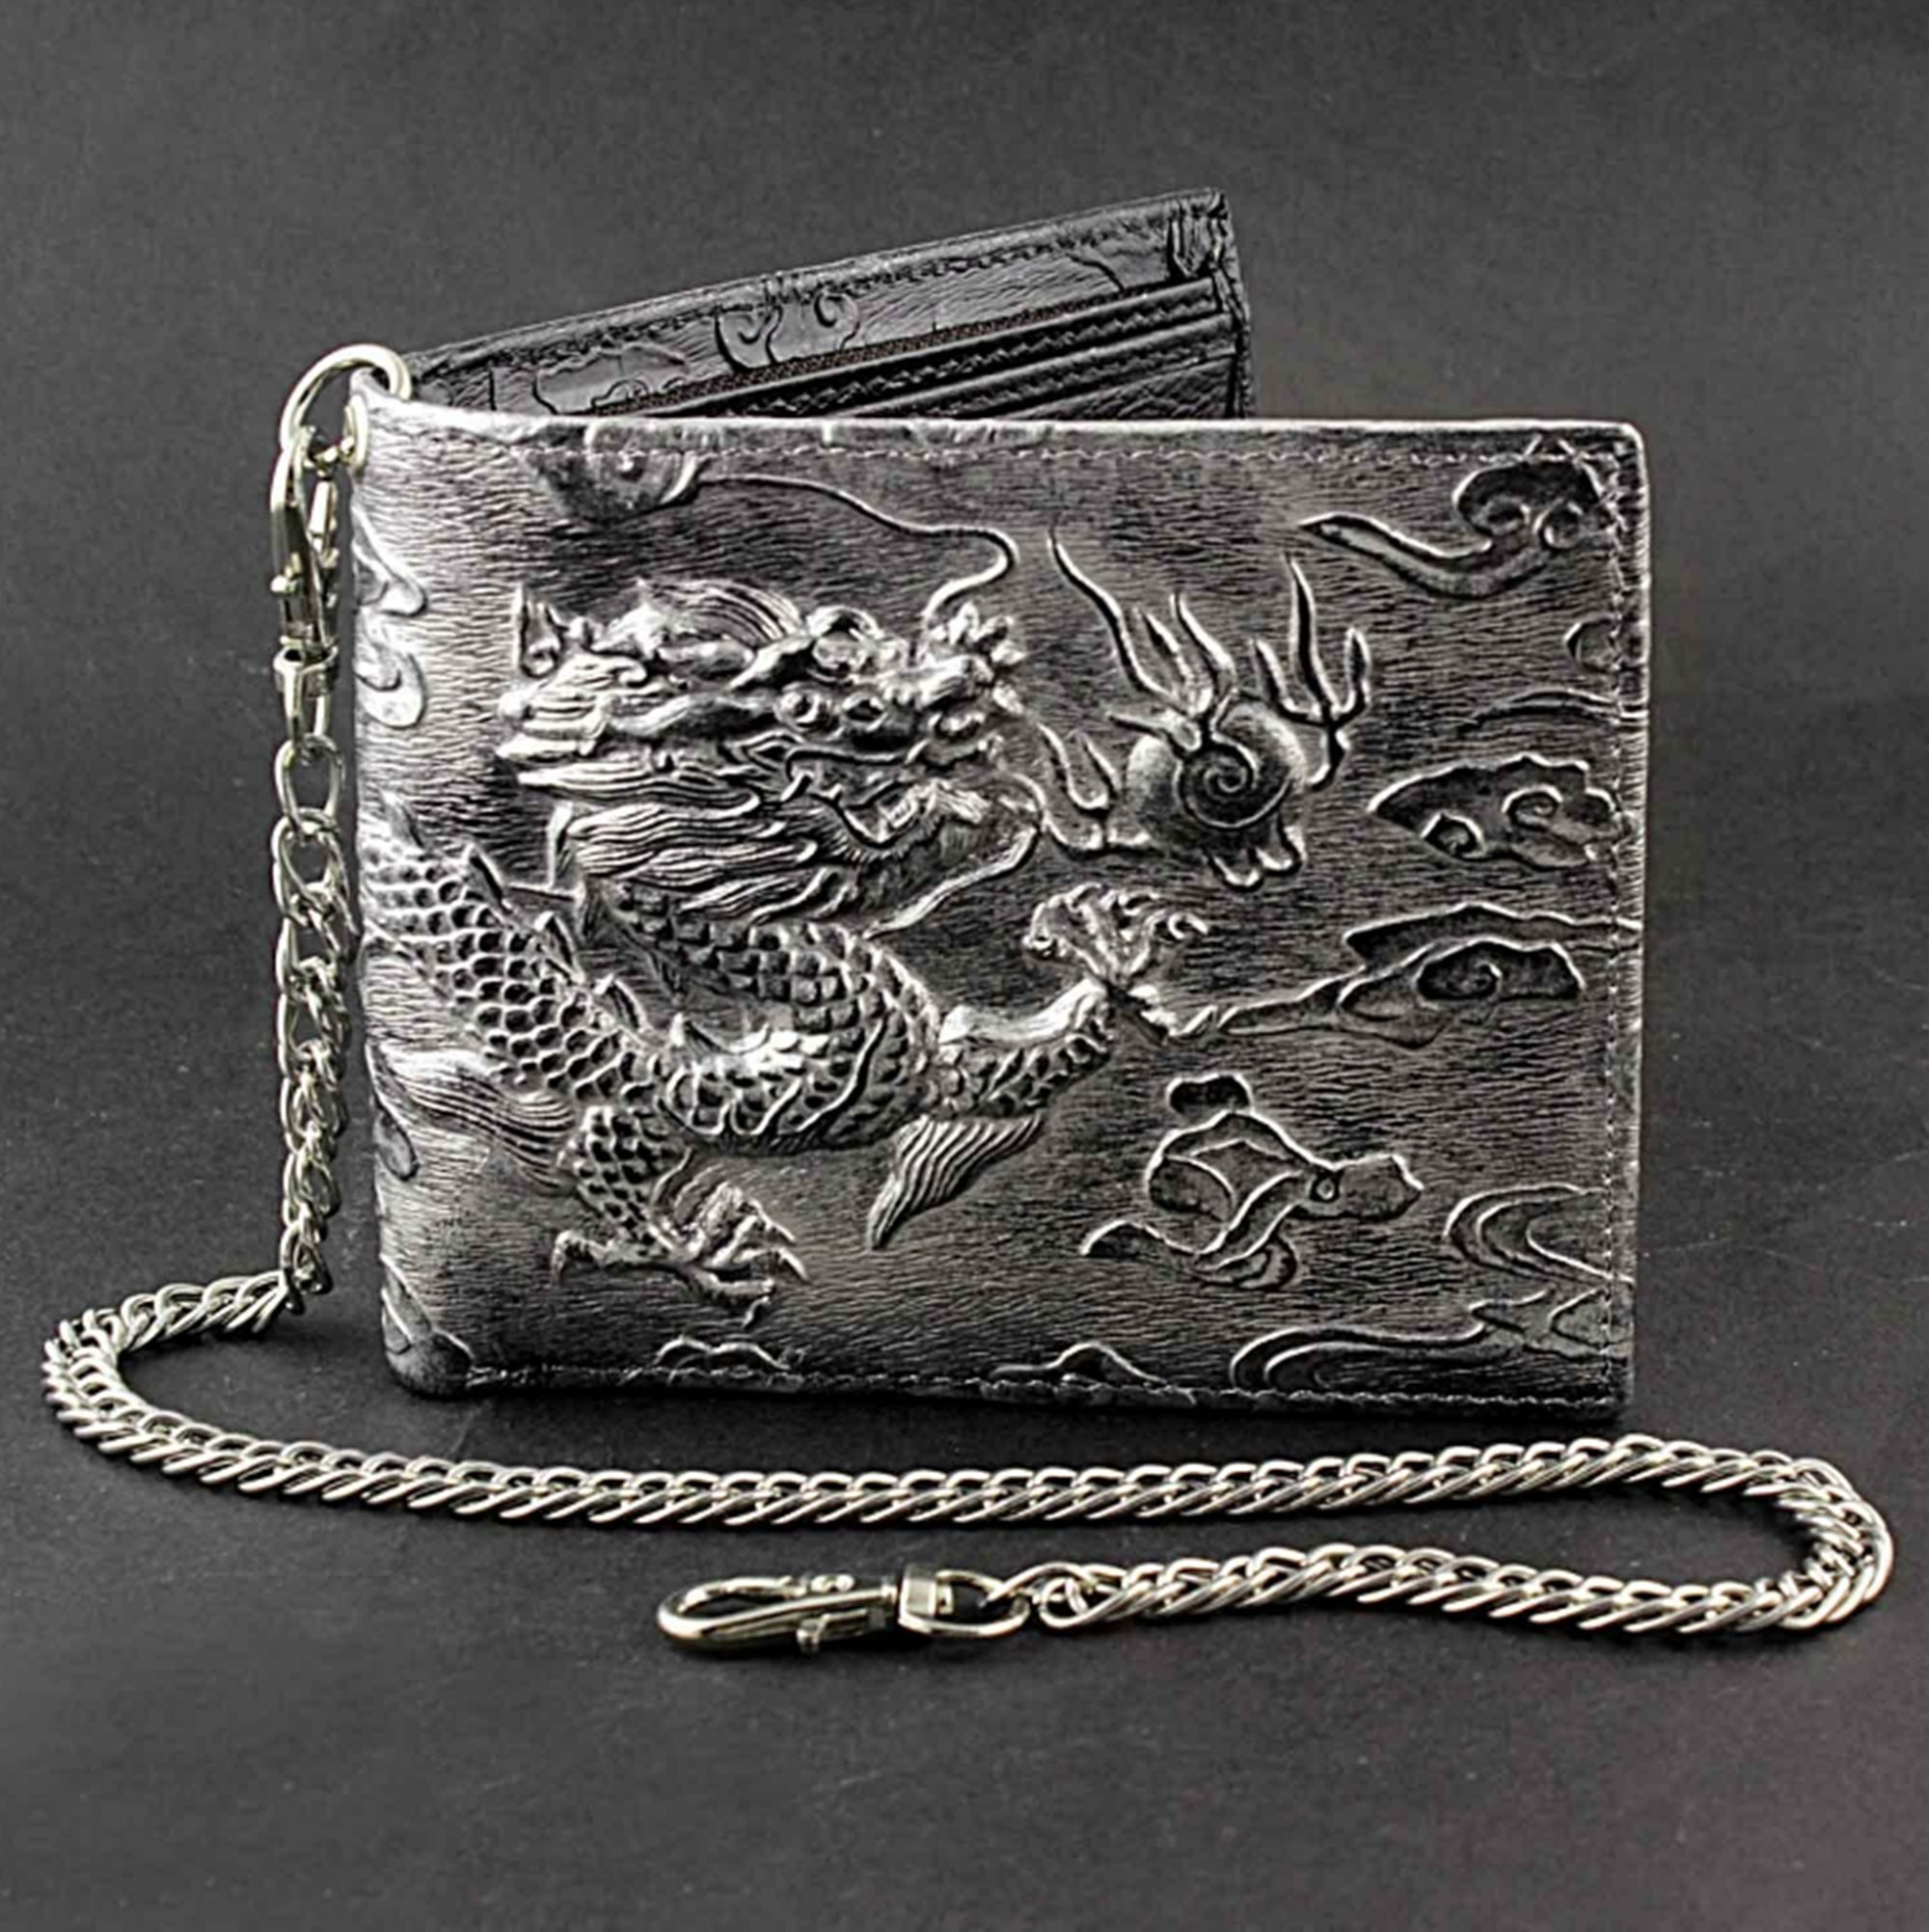 Black Bear Brand Handmade Sterling Silver Wallet Chain and Horsehide Wallet Collaboration